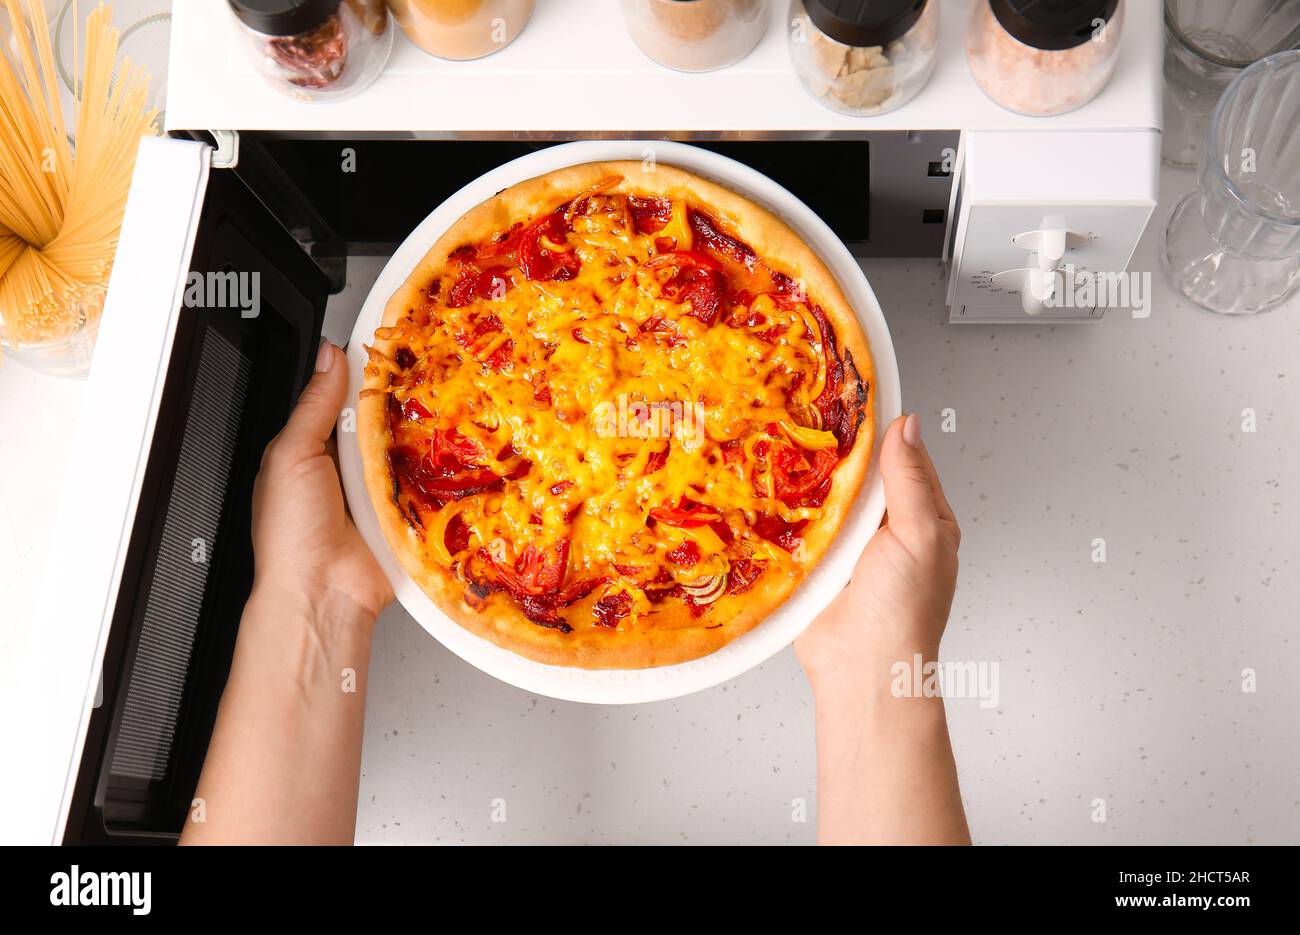 https://c8.alamy.com/comp/2HCT5AR/woman-putting-plate-with-pizza-into-microwave-oven-in-kitchen-closeup-2HCT5AR.jpg